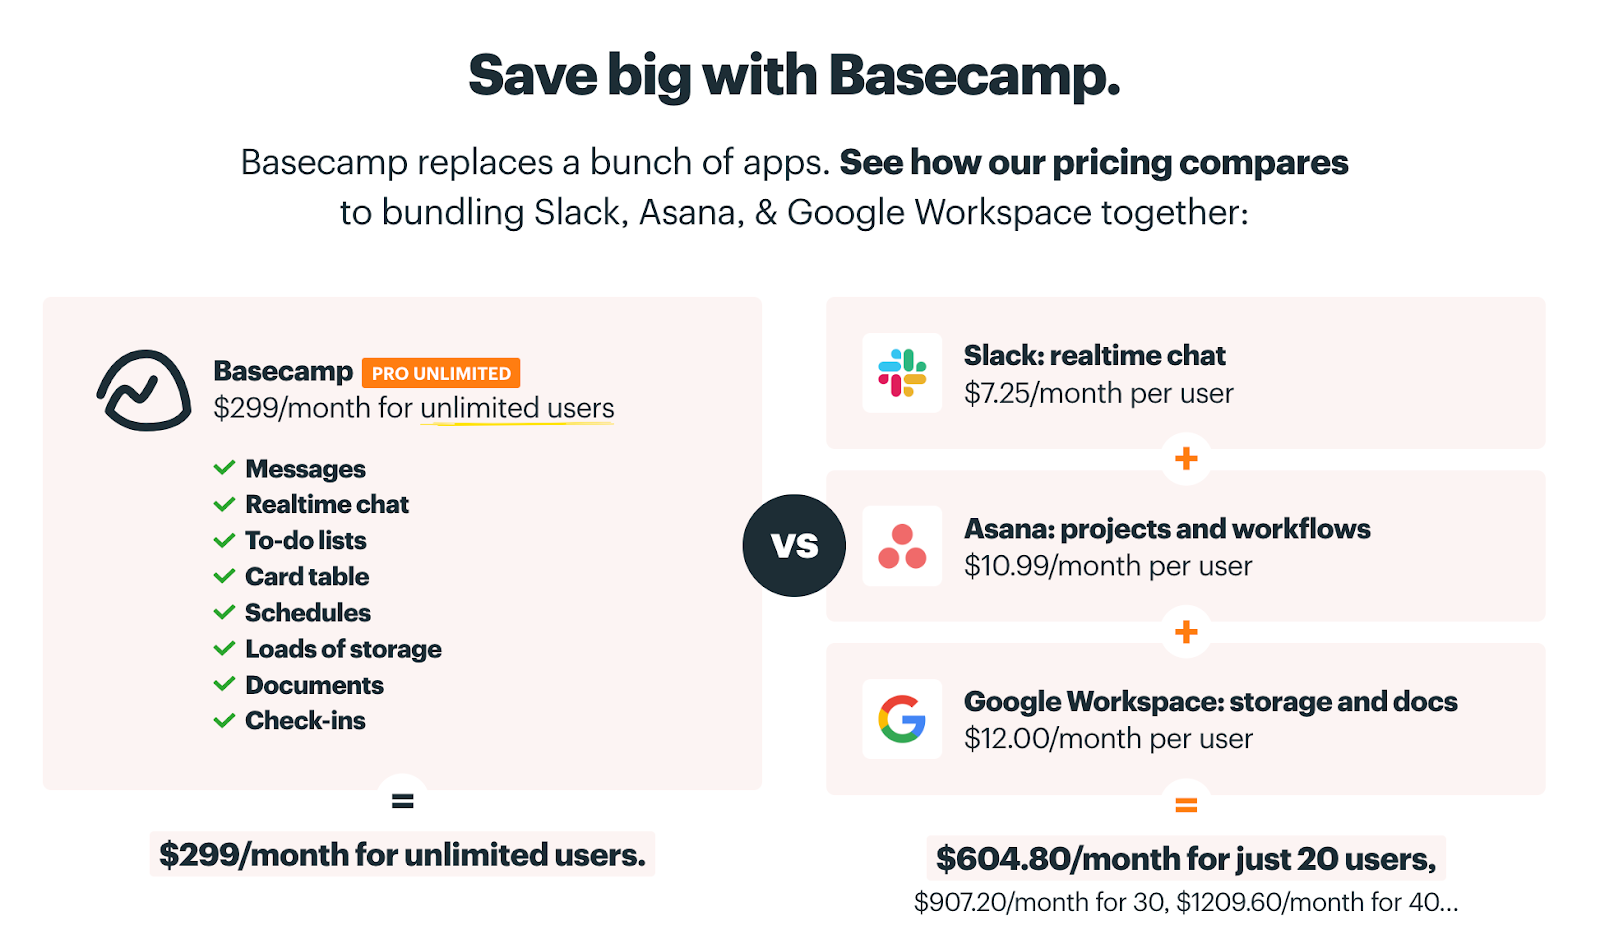 “Save big with Basecamp” section on Basecamp's pricing page